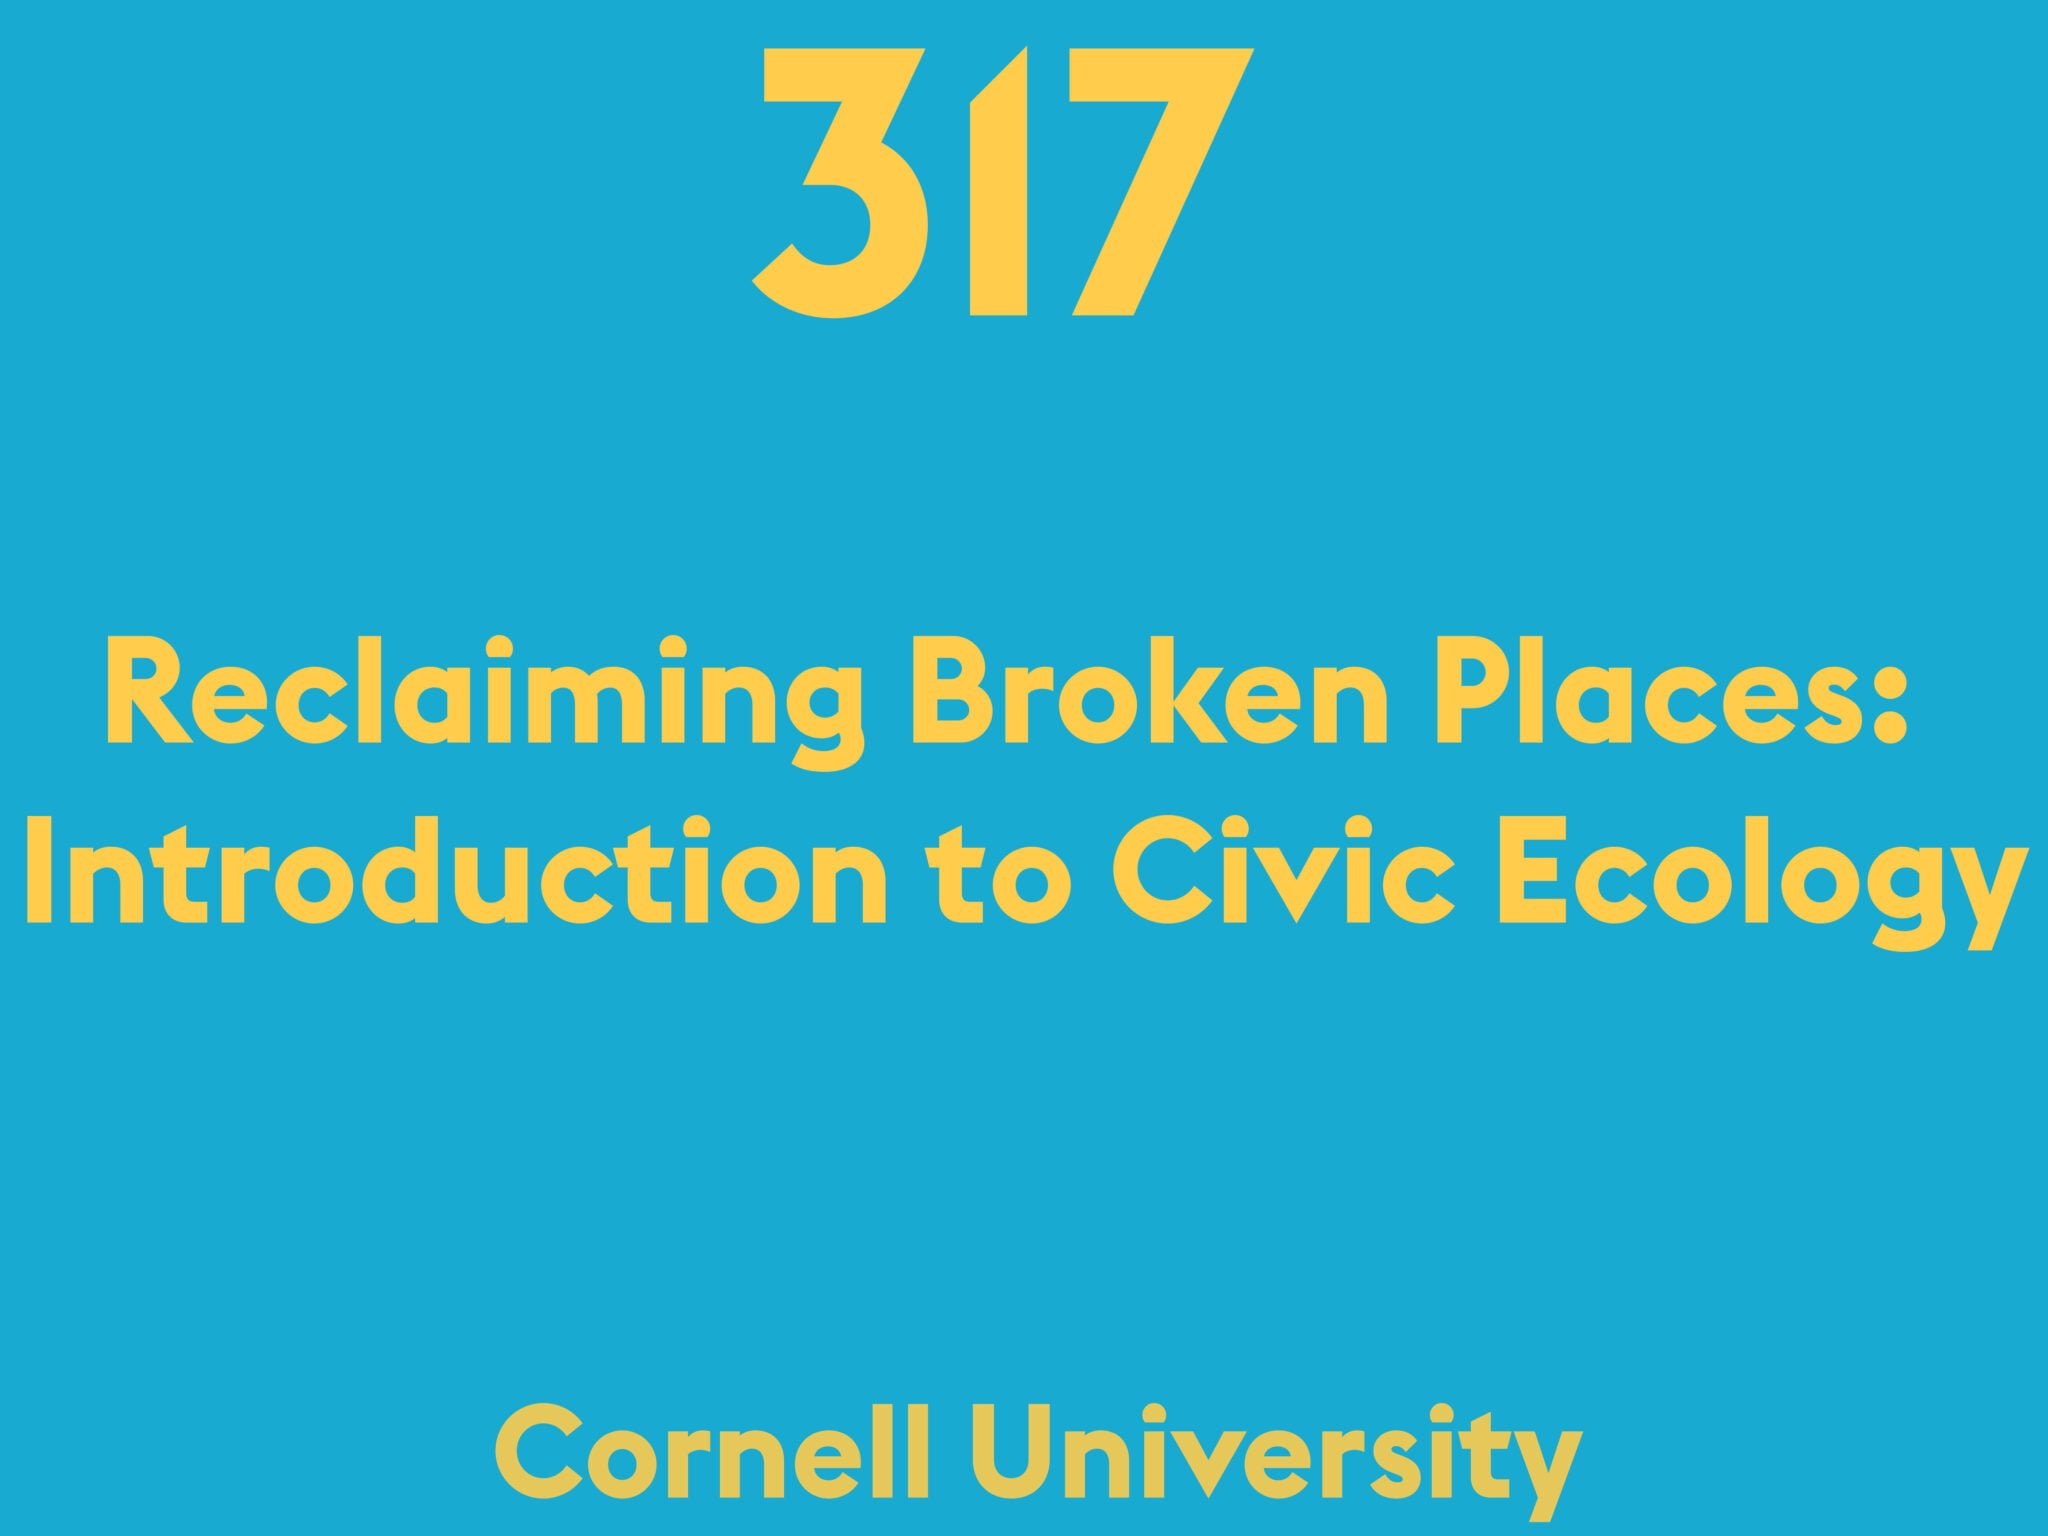 Reclaiming Broken Places: Introduction to Civic Ecology